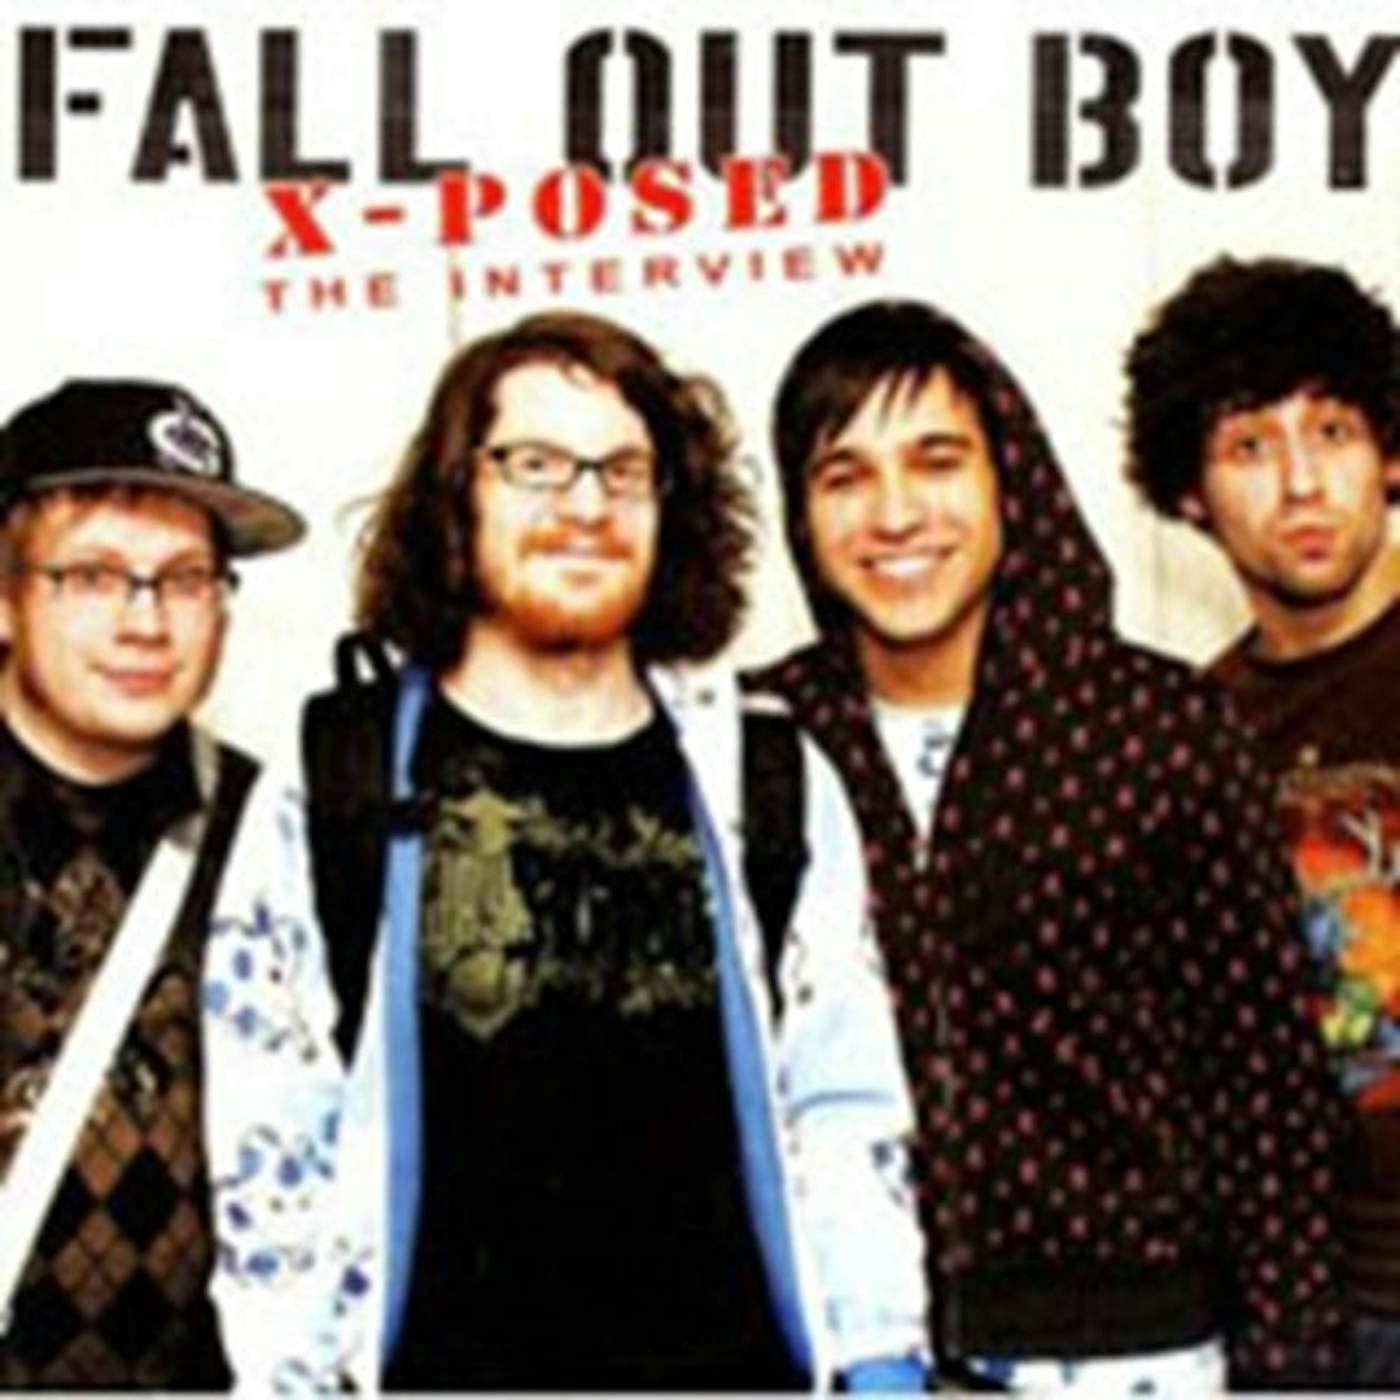 Fall Out Boy CD - Fall Out Boy - X-Posed